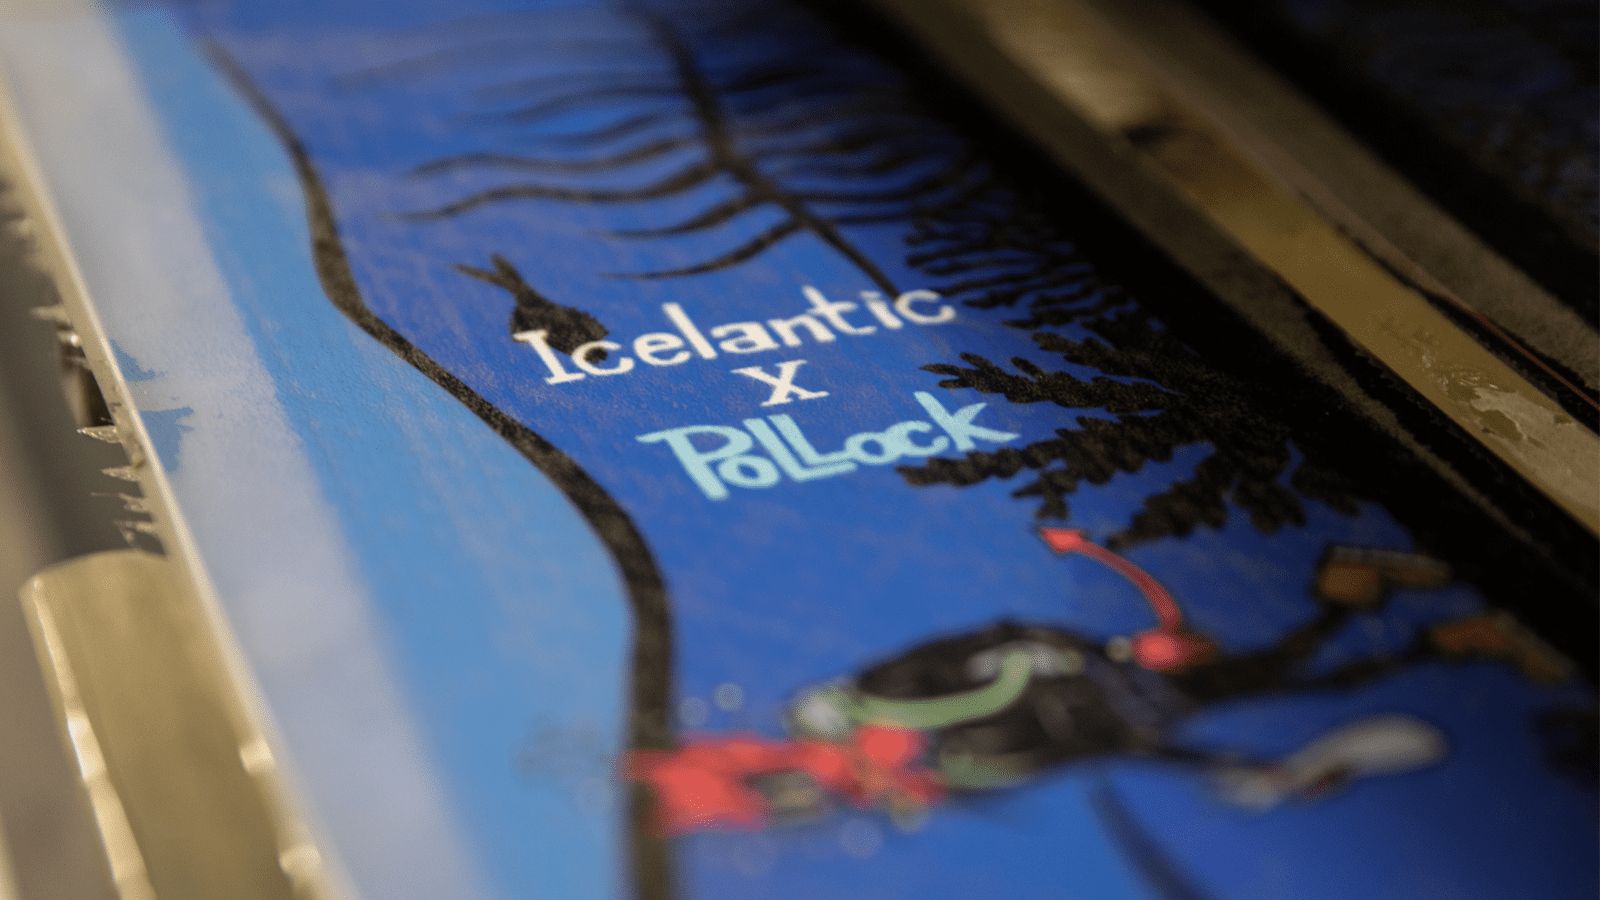 Behind the scenes of the new limited-edition Icelantic X Jim Pollock collaboration ski